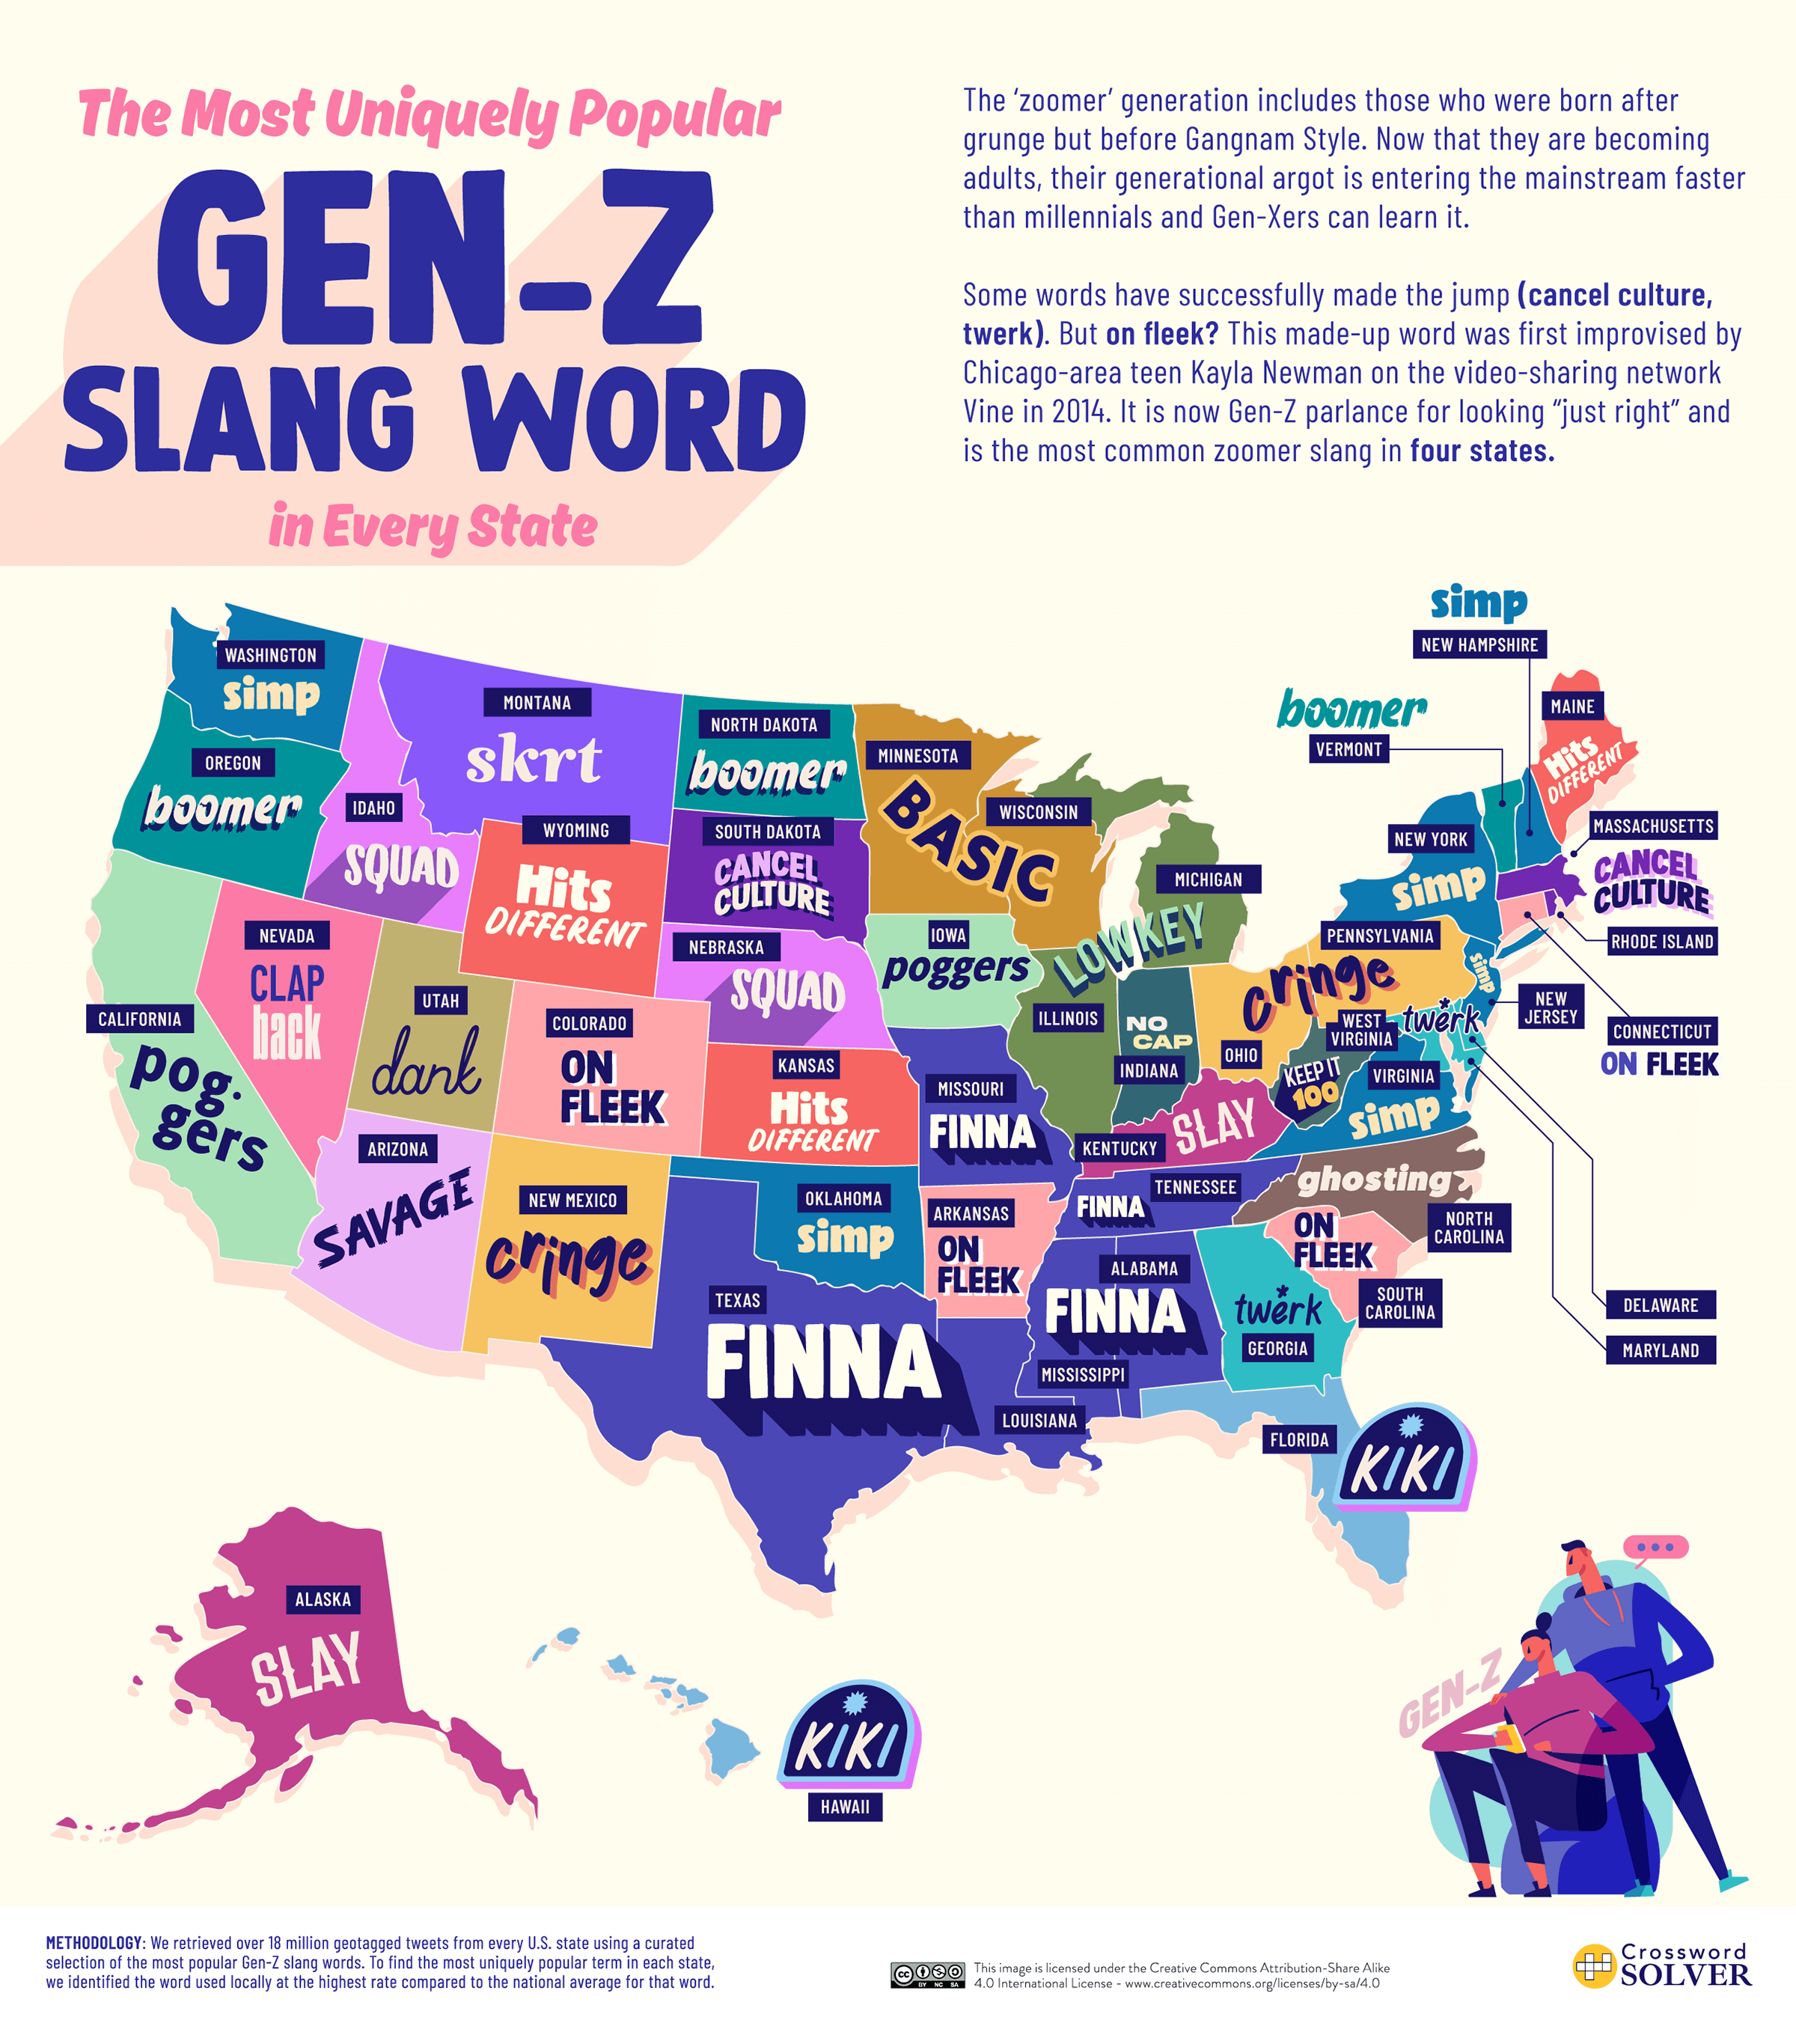 The Most Popular Gen Z Slang Term in Each State